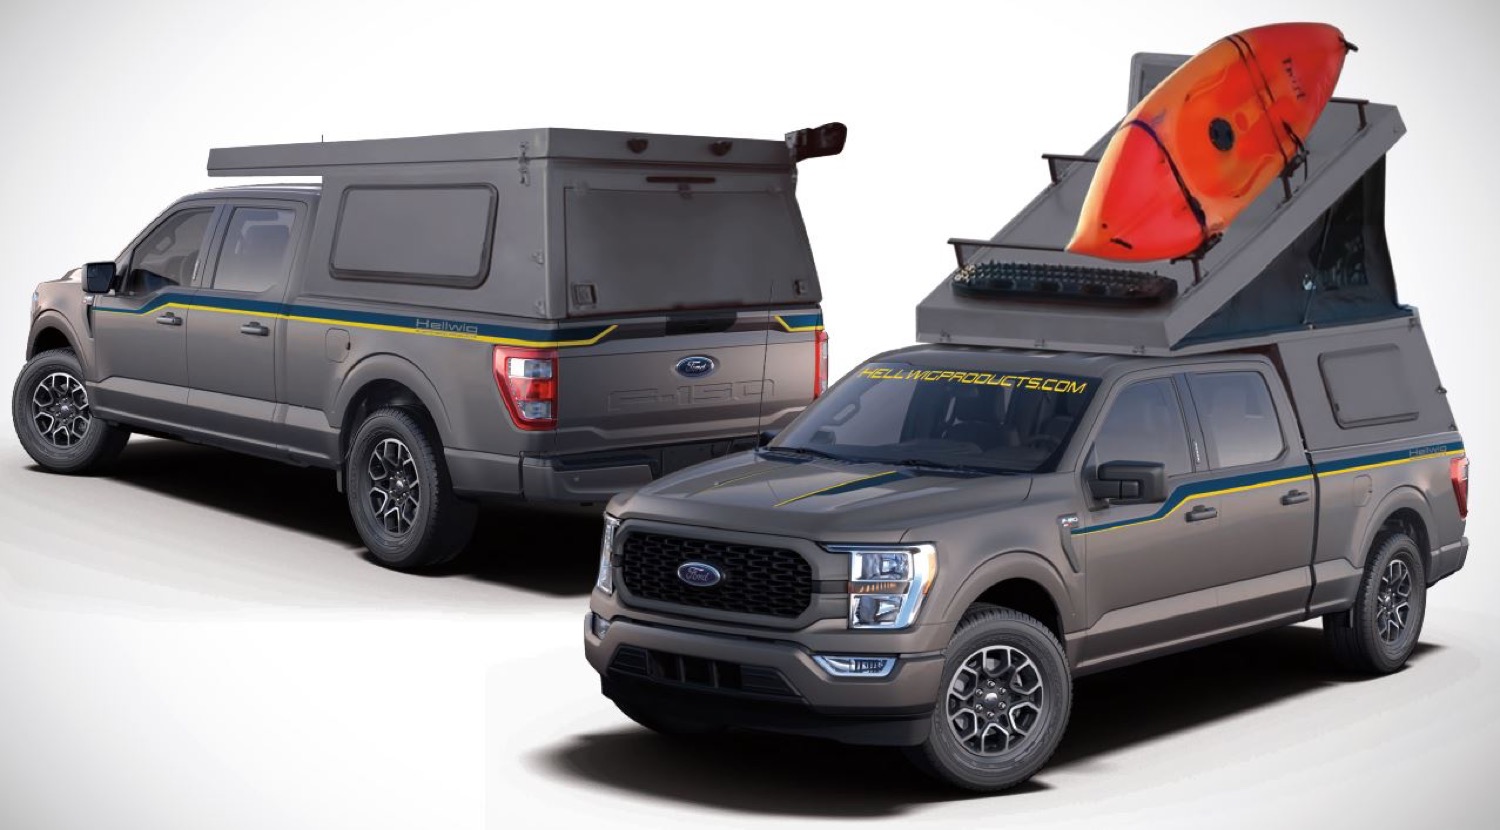 Hellwig F-150 PowerBoost Hybrid Is The Ultimate Full-Size Camper Truck